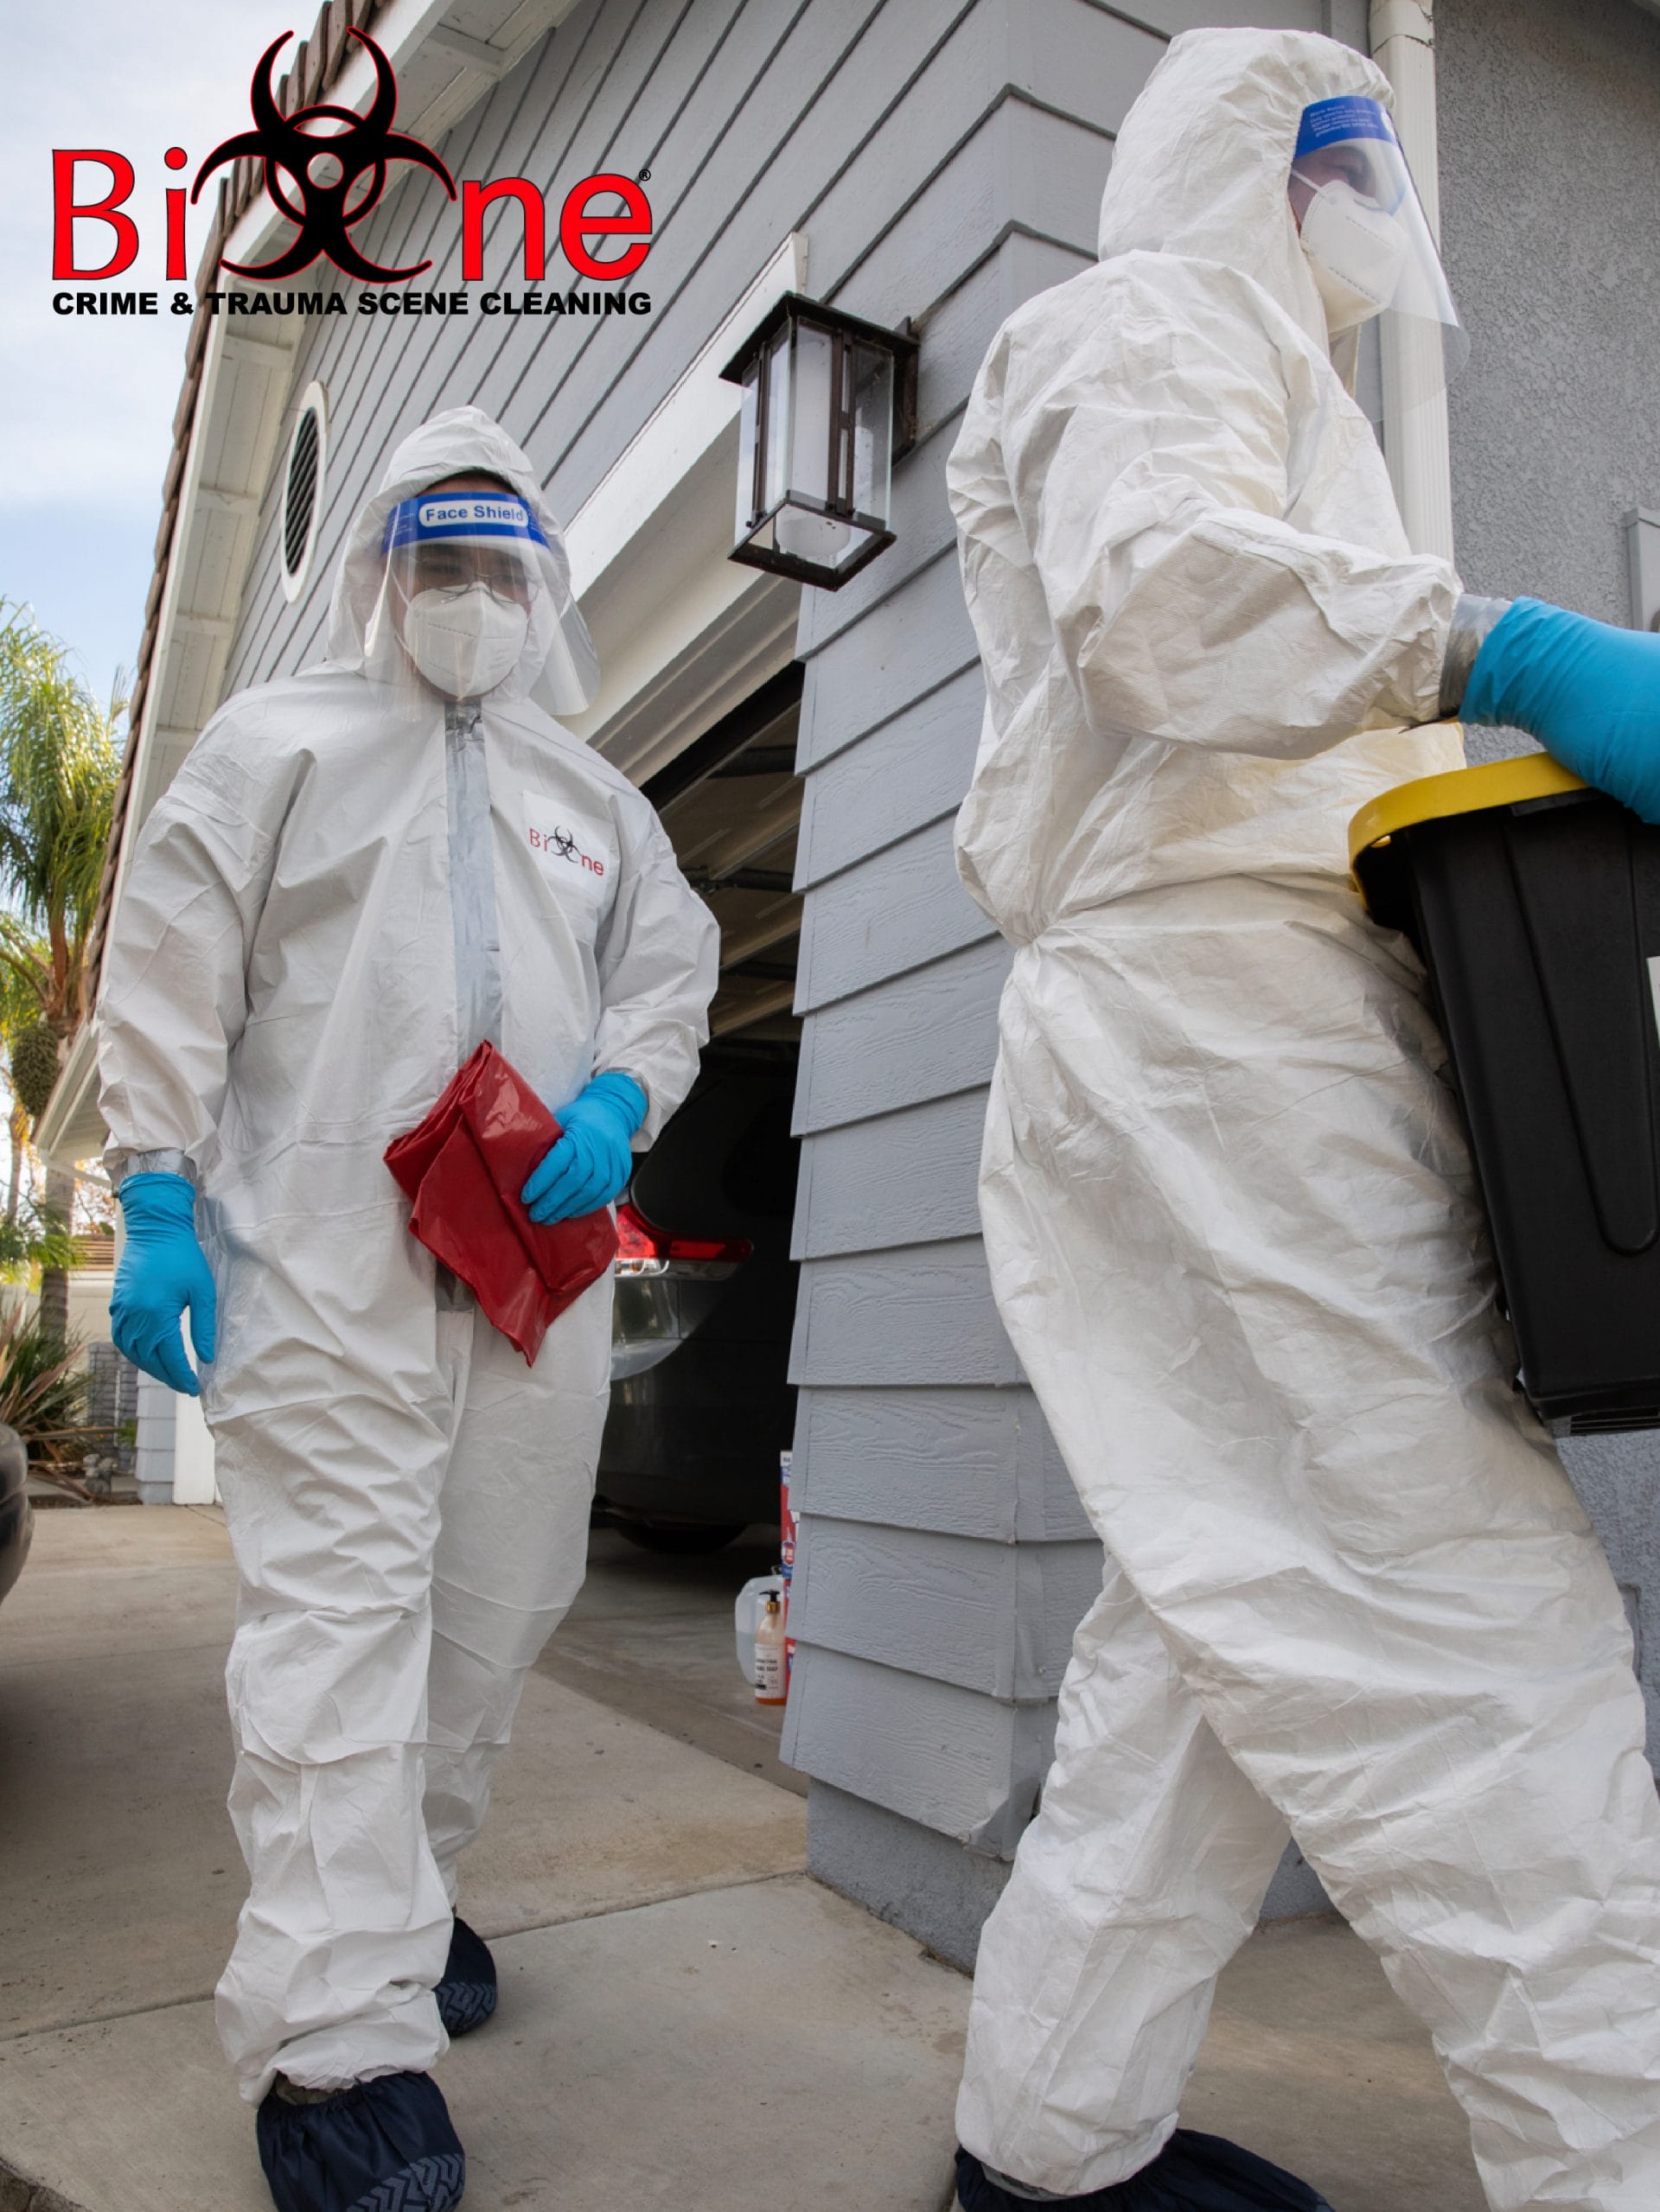 Bio-One of Orange specialists are prepared to clean and disinfect houses and properties from COVID-19 virus to minimize the risk of exposure and spread.